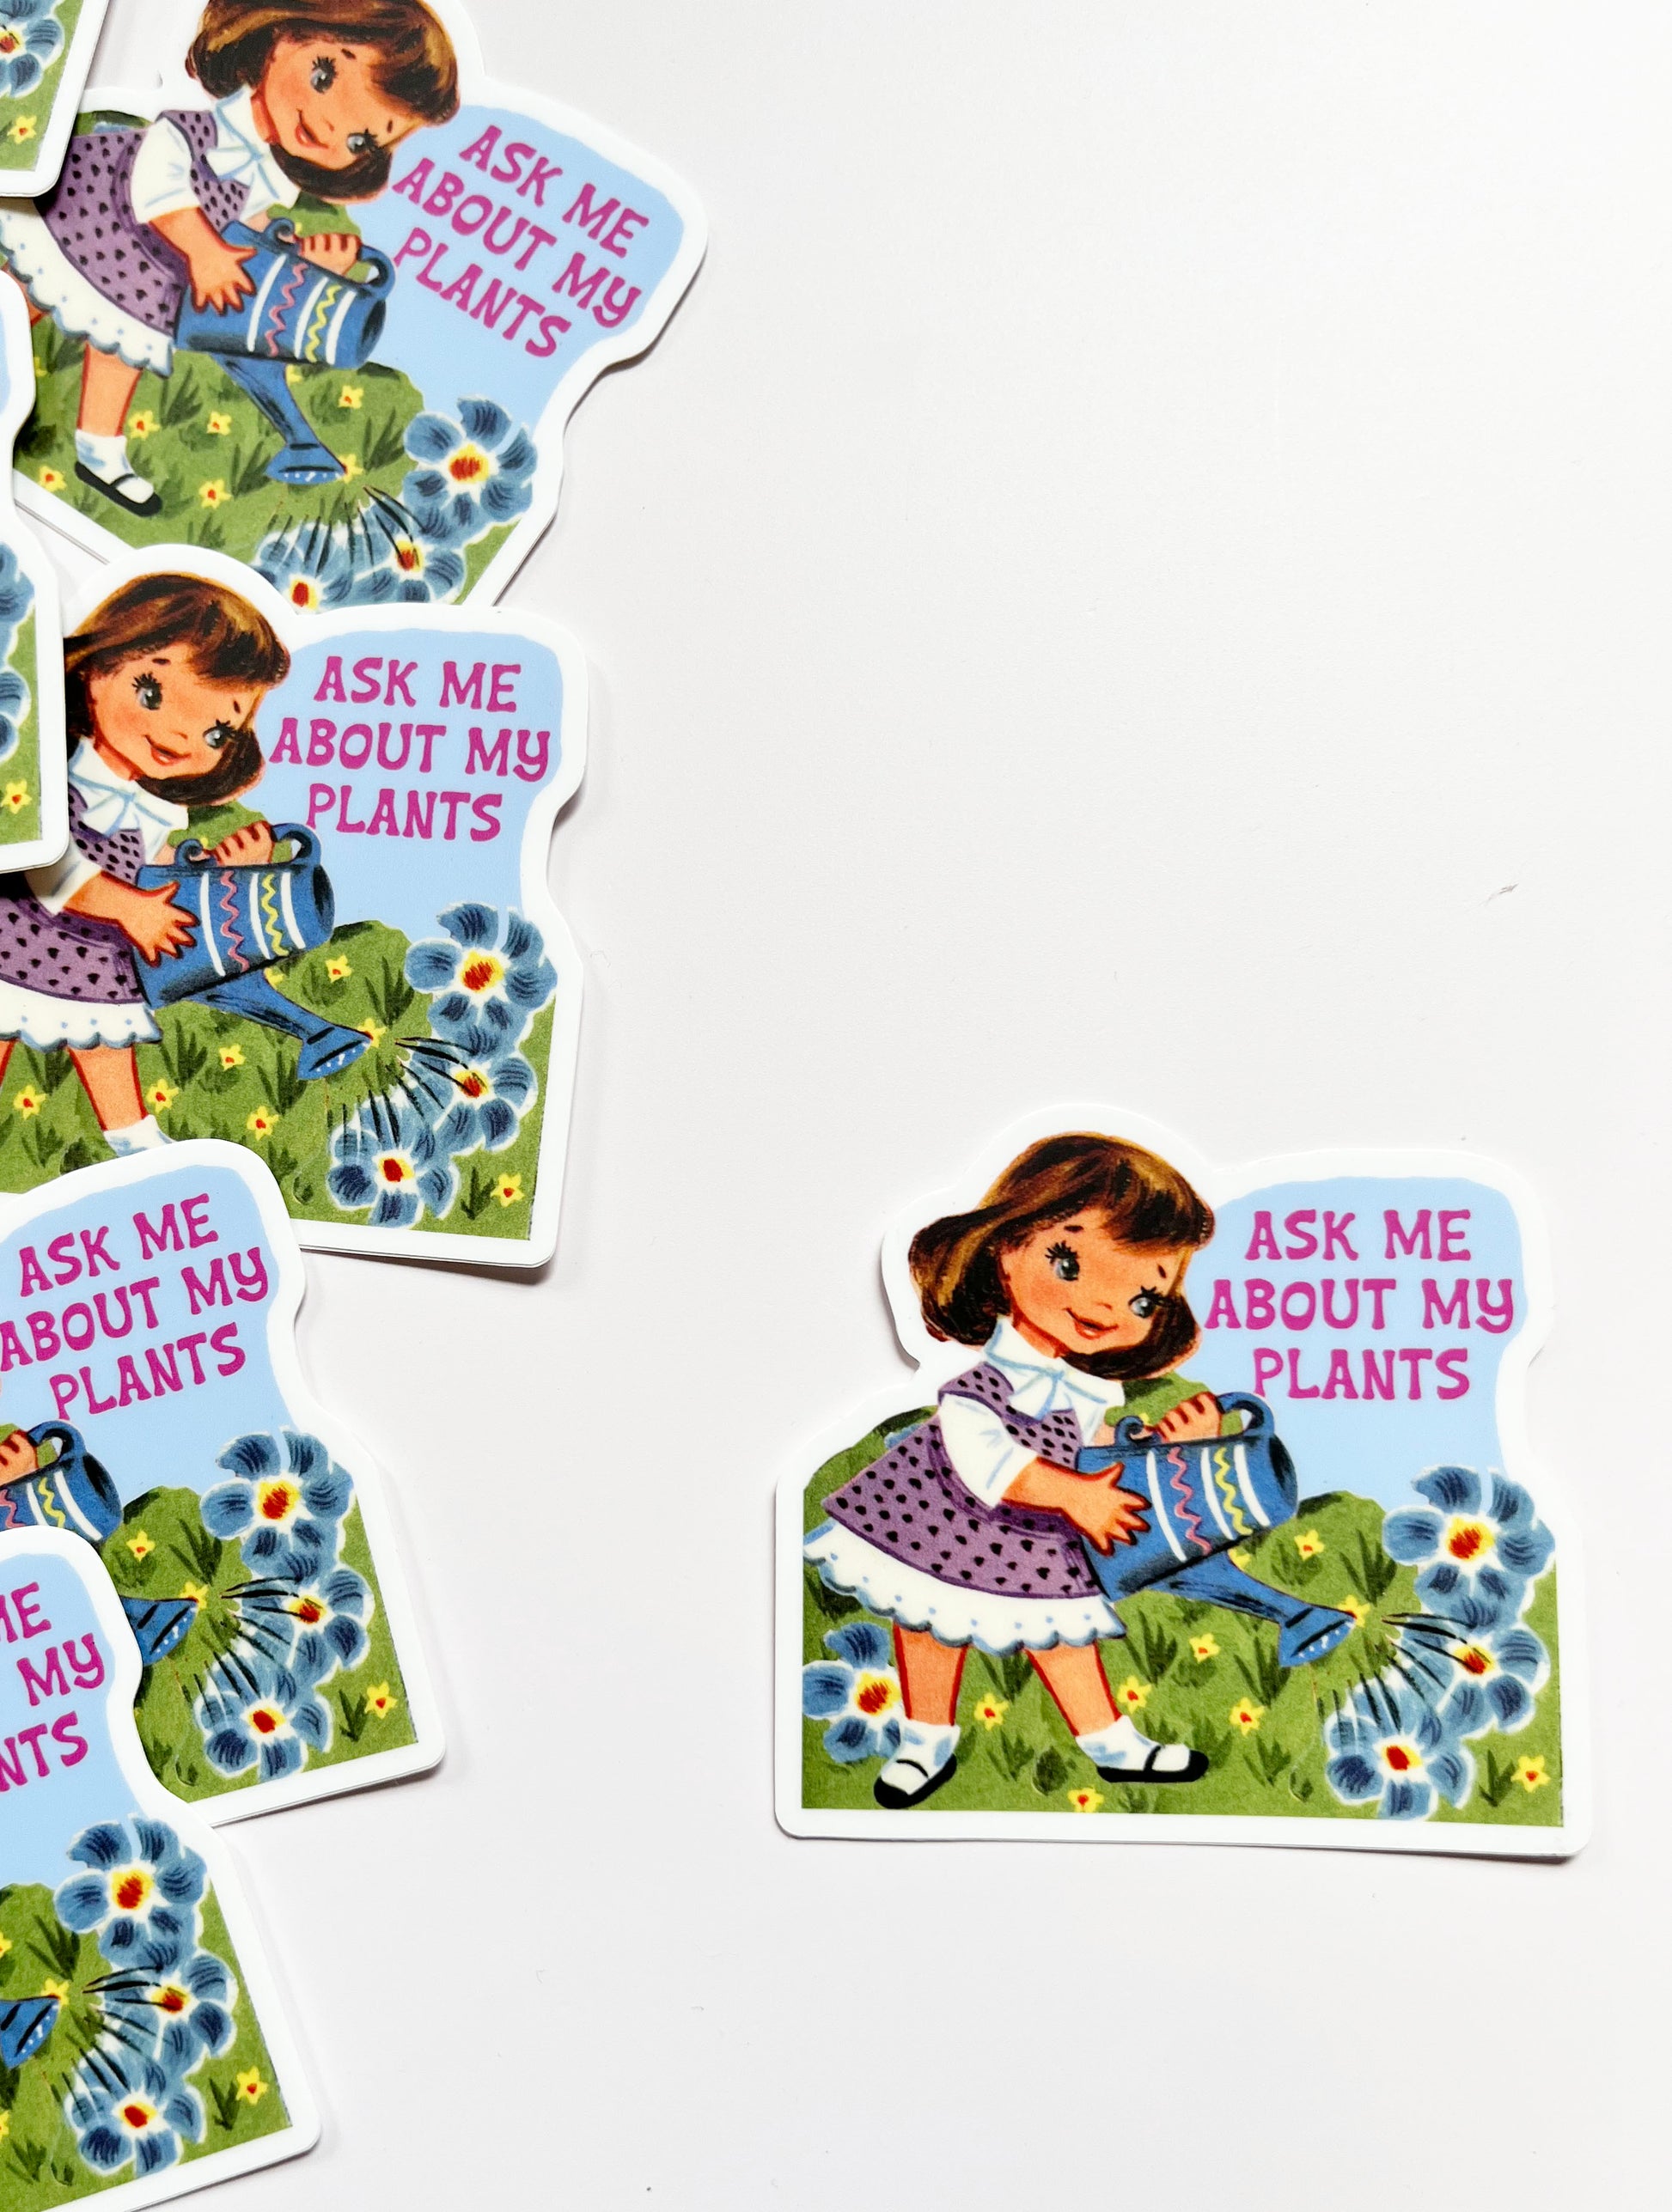 funny plant lady sticker ask me about my plants vintage girl watering plants flowers gift for gardener plant lover stocking stuffer cute coin laundry funny stickers 